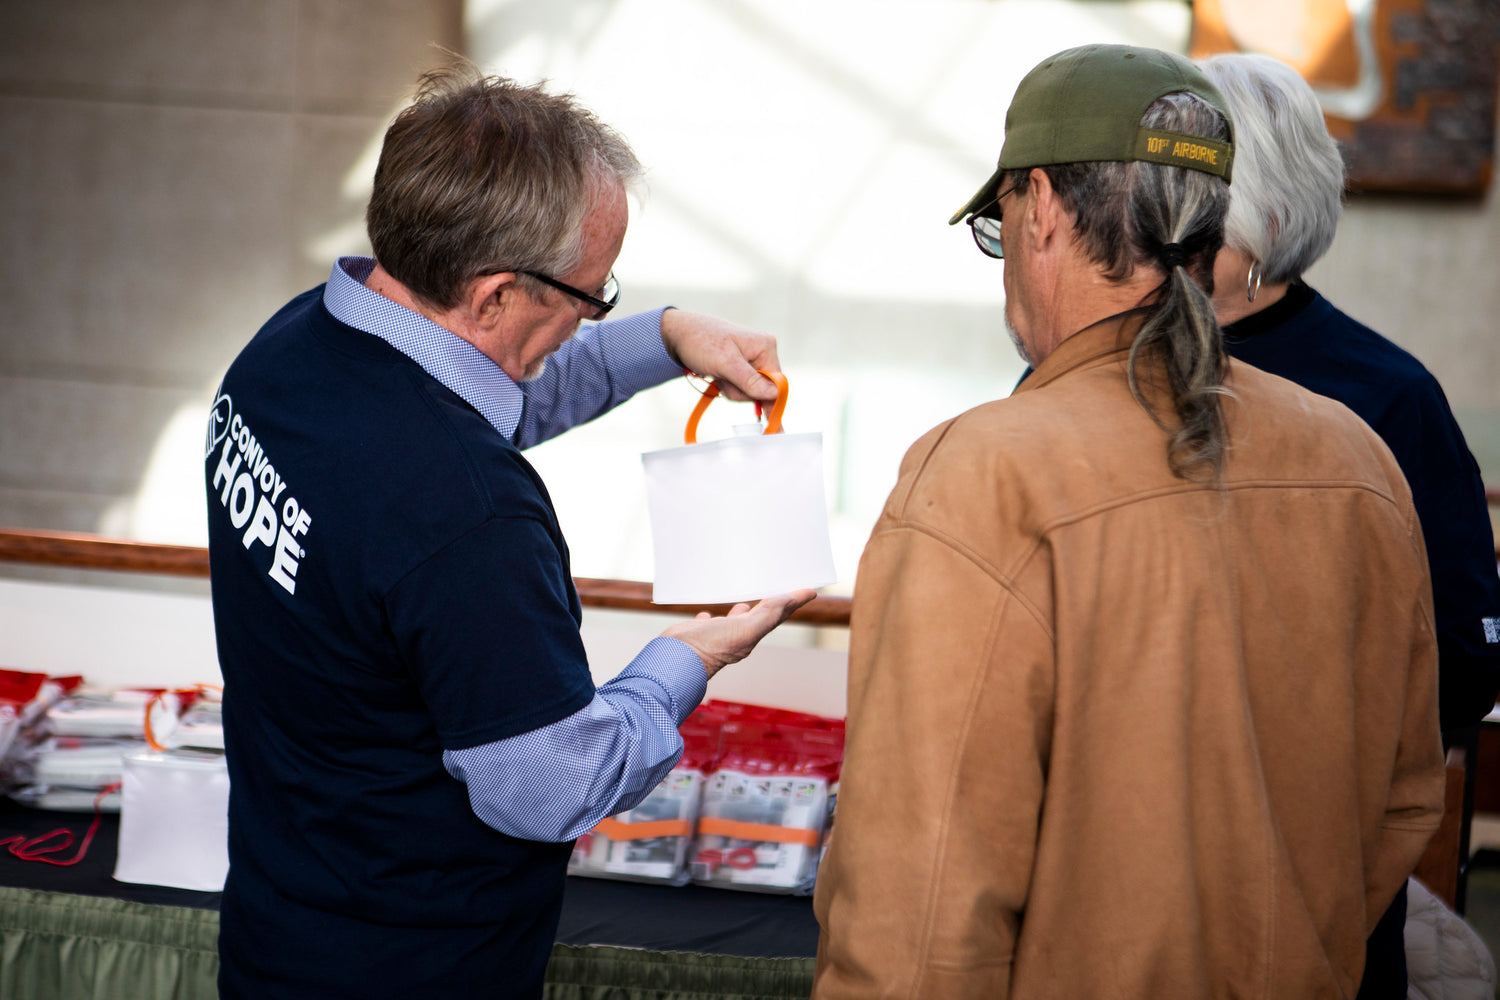 Notes From the Field: Serving the Homeless with Convoy of Hope